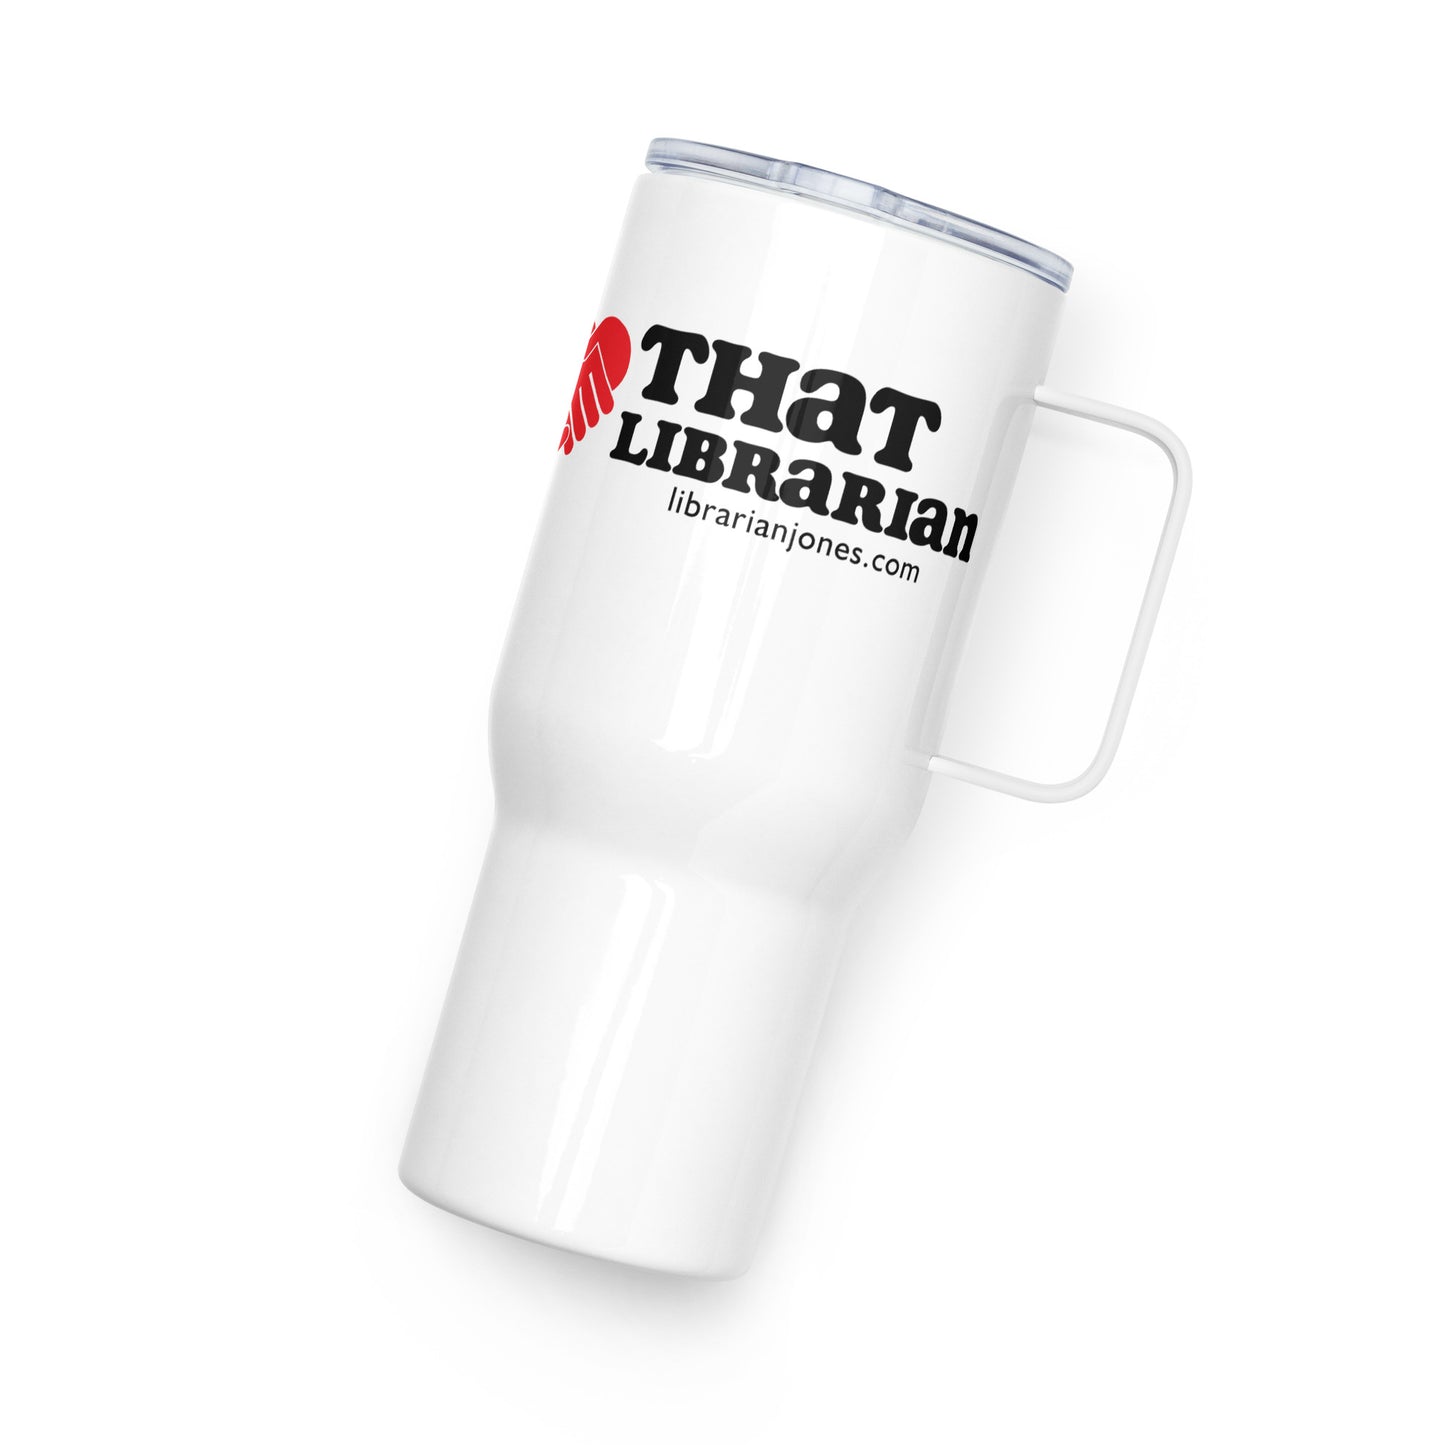 That Librarian Travel mug with a handle